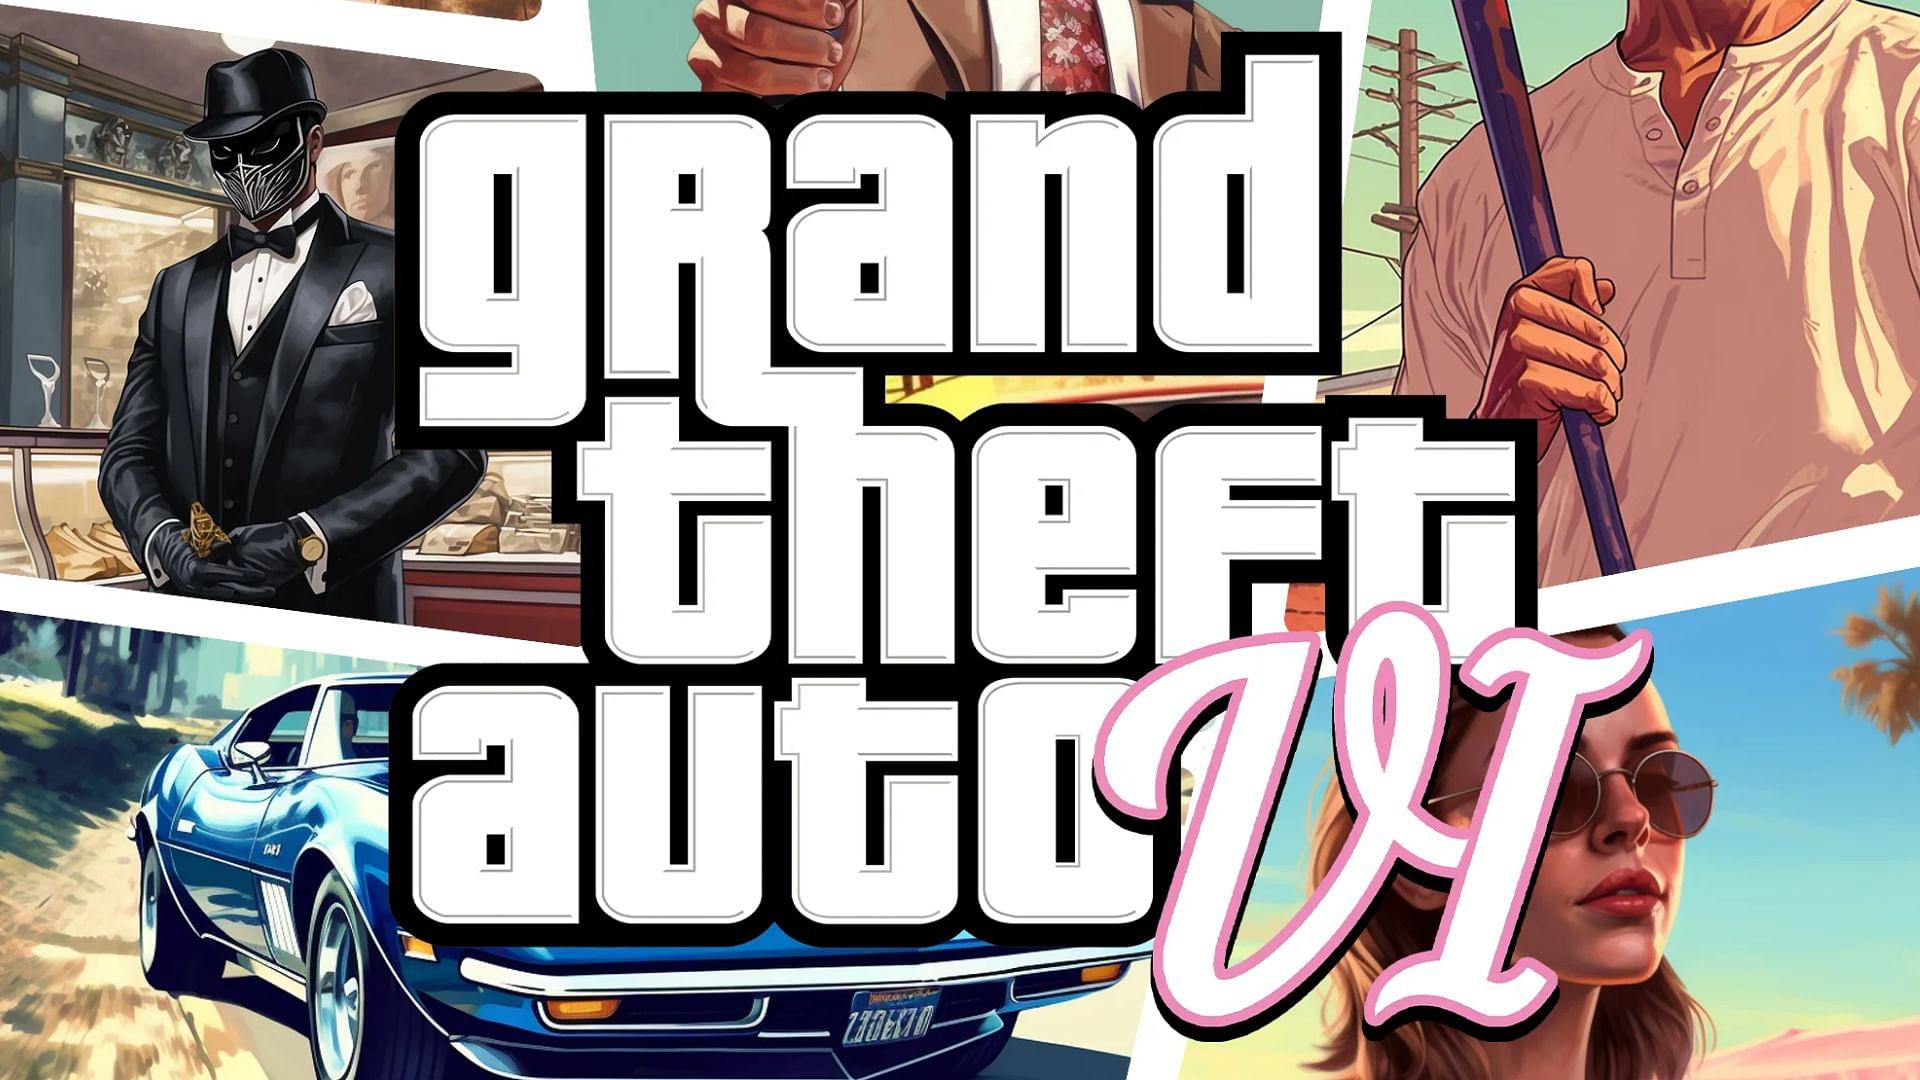 An illustration fan art of the GTA 6 cover image